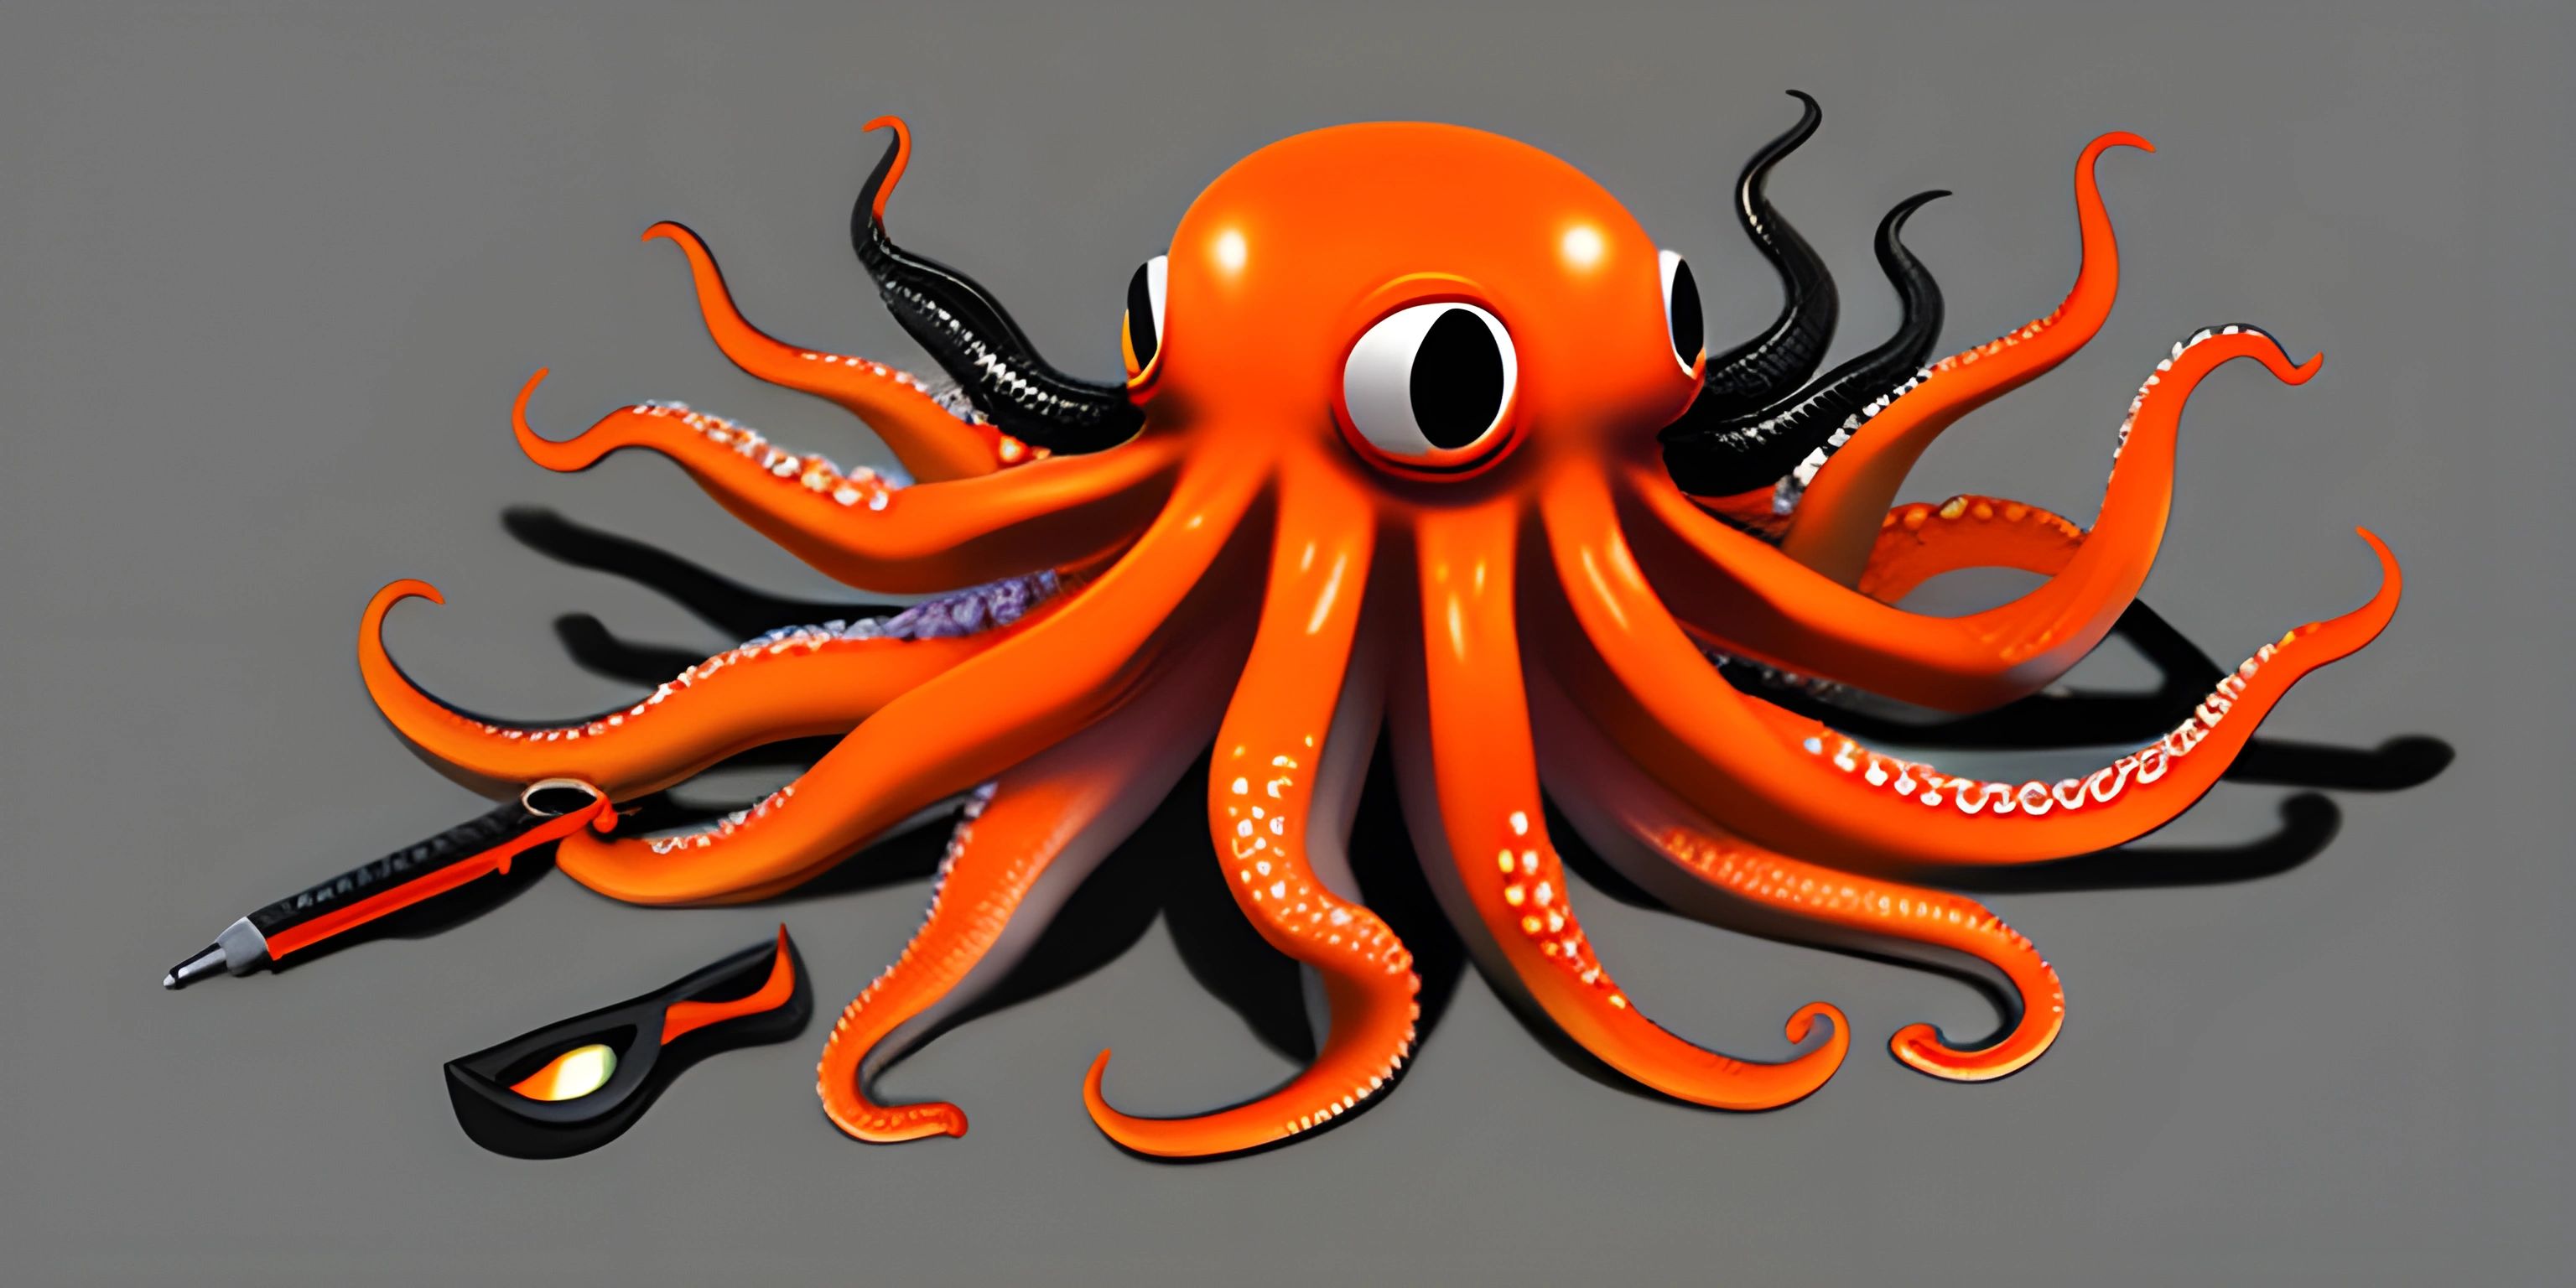 a close up of an orange octopus holding scissors and scissors in his hands on a gray background